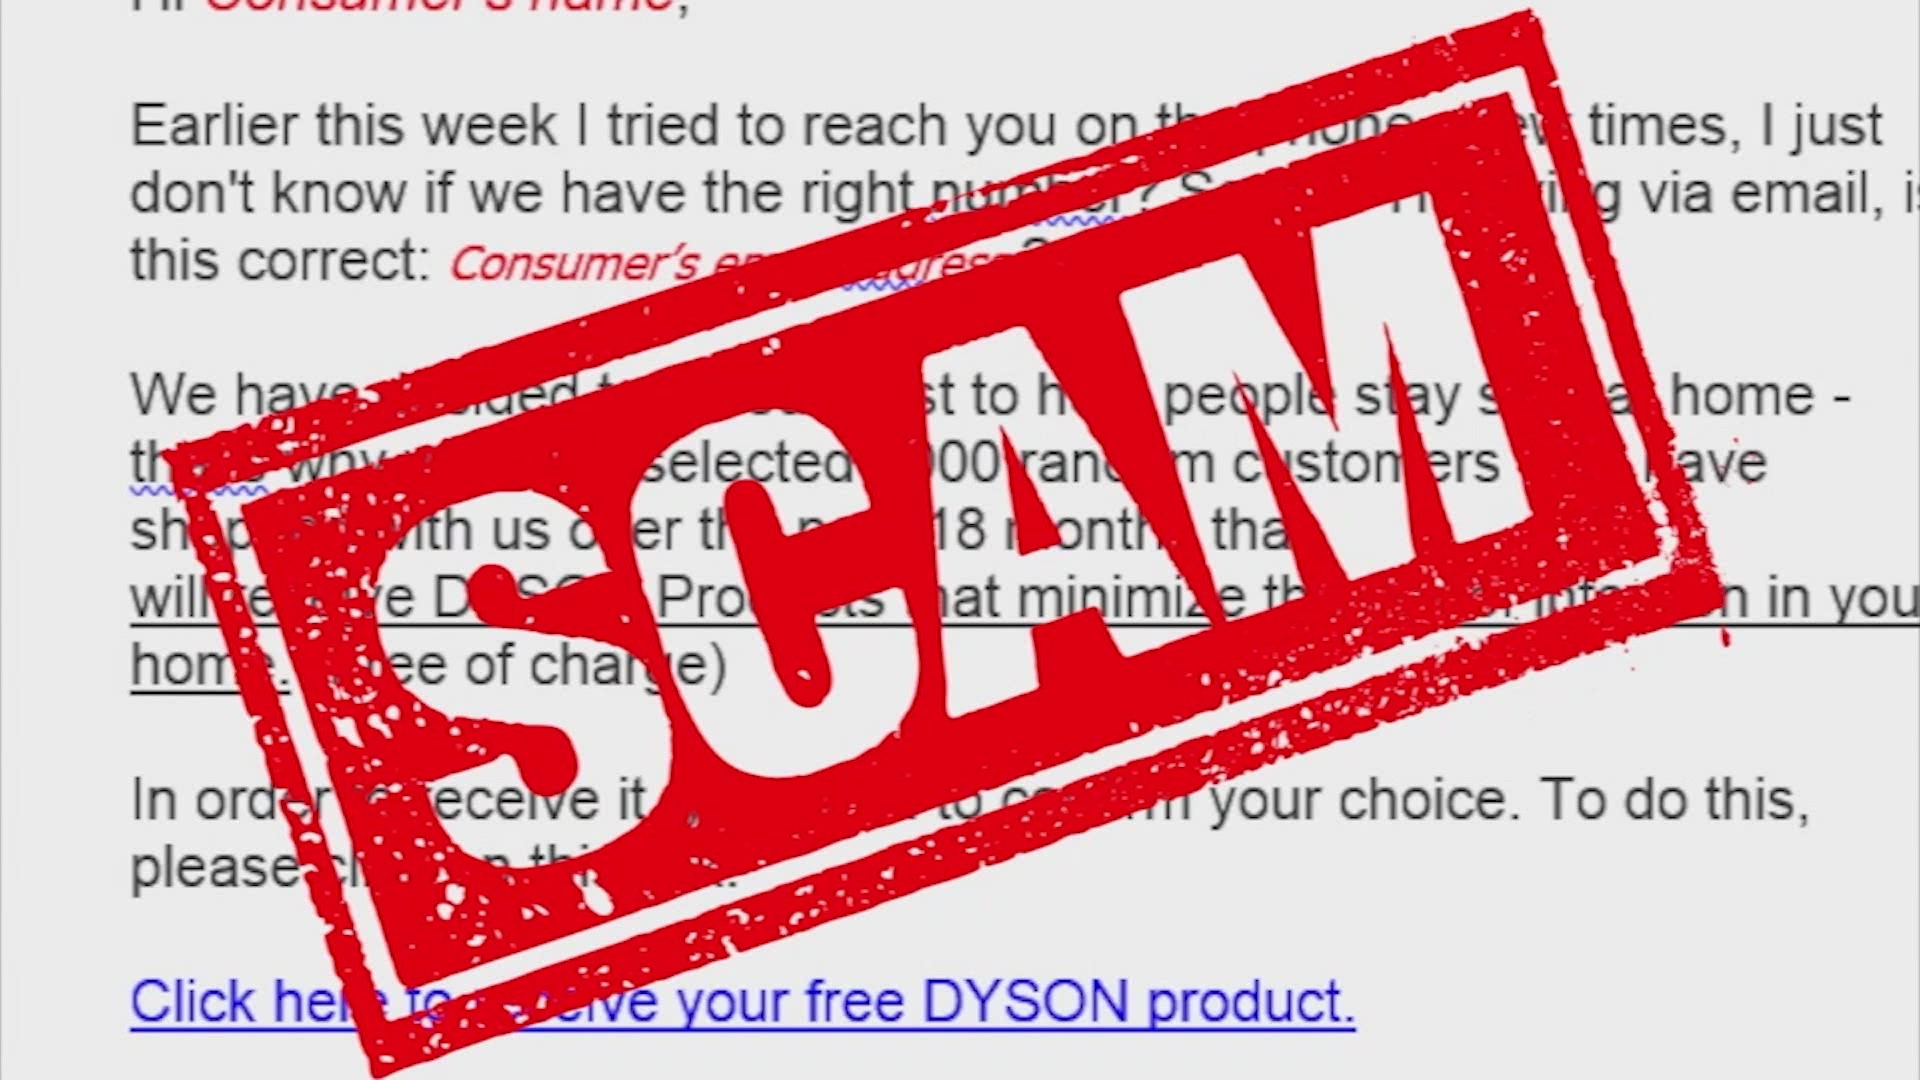 Wouldn't it be nice to get a brand new vacuum? But we have a warning about an offer to win a free Dyson.